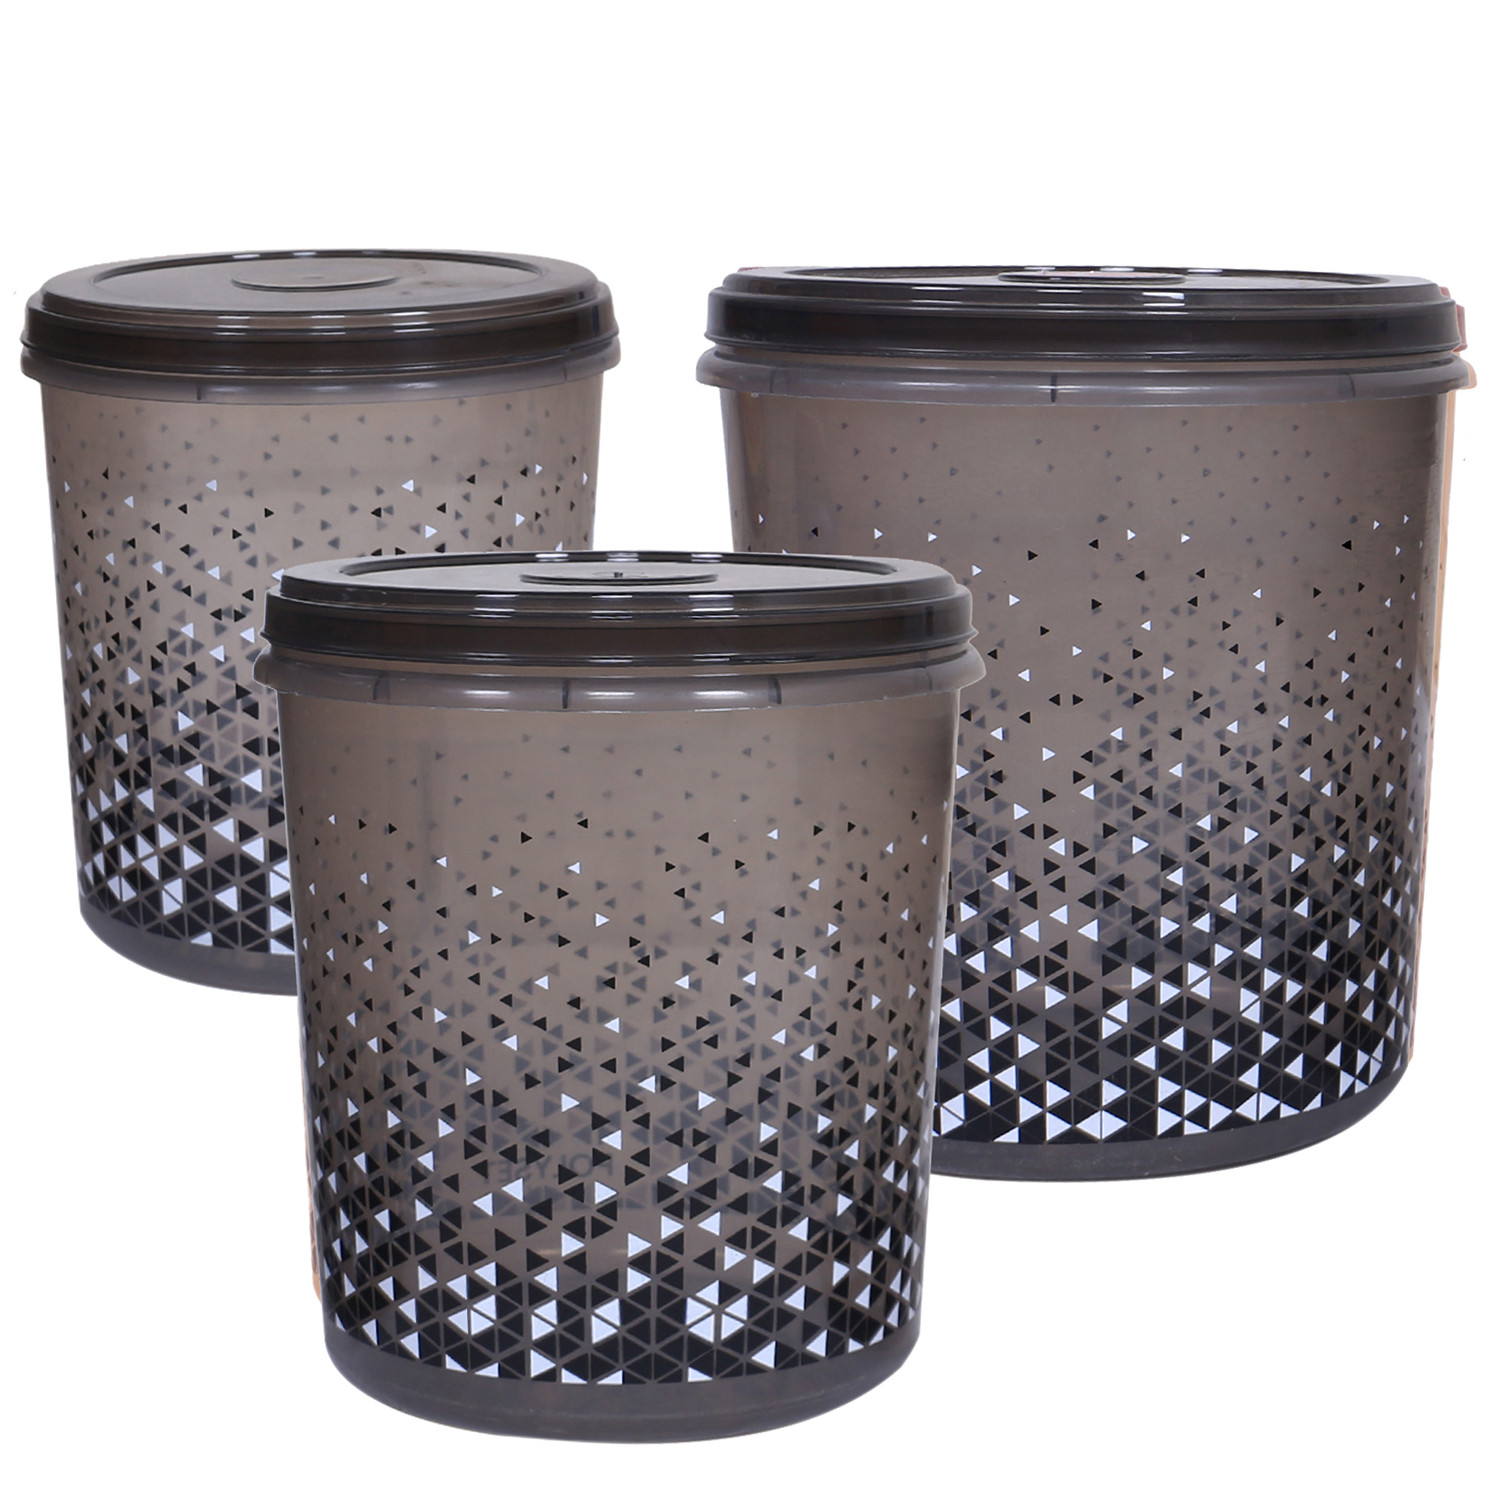 Kuber Industries Plastic Container|Container For Kitchen Storage Set|Air Tight Container|Tinted Printed 5 Litre,7 Litre,10 Litre Containers|Set of 3 (Grey)